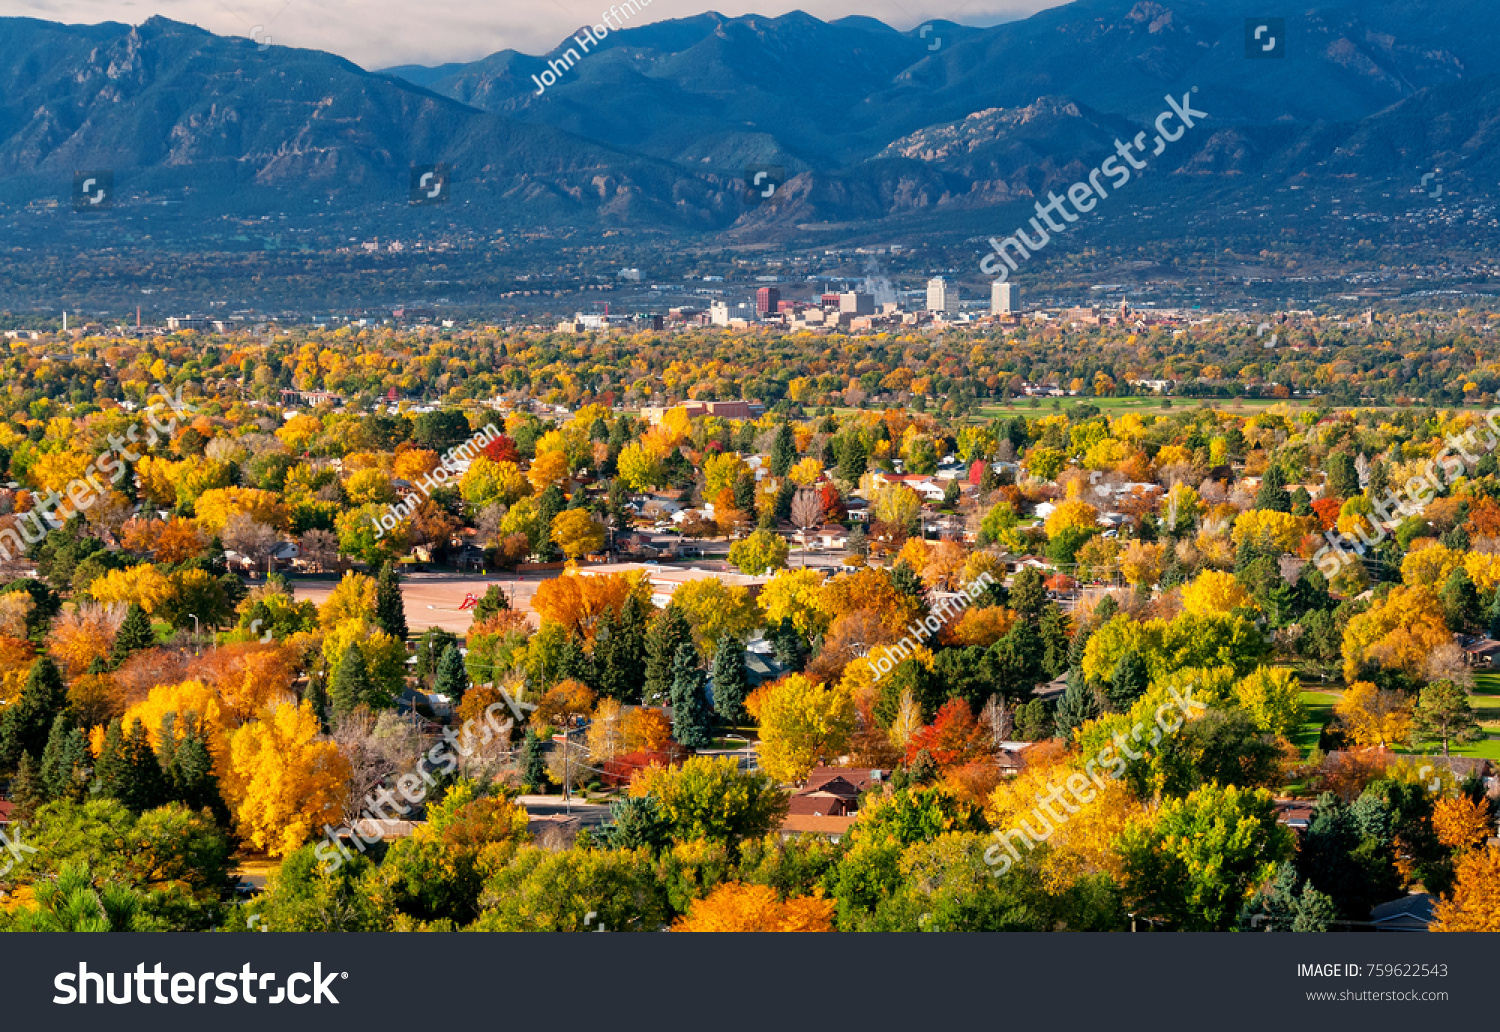 Downtown Colorado Springs as seen from Grandview Lookout in Palmer Park #759622543